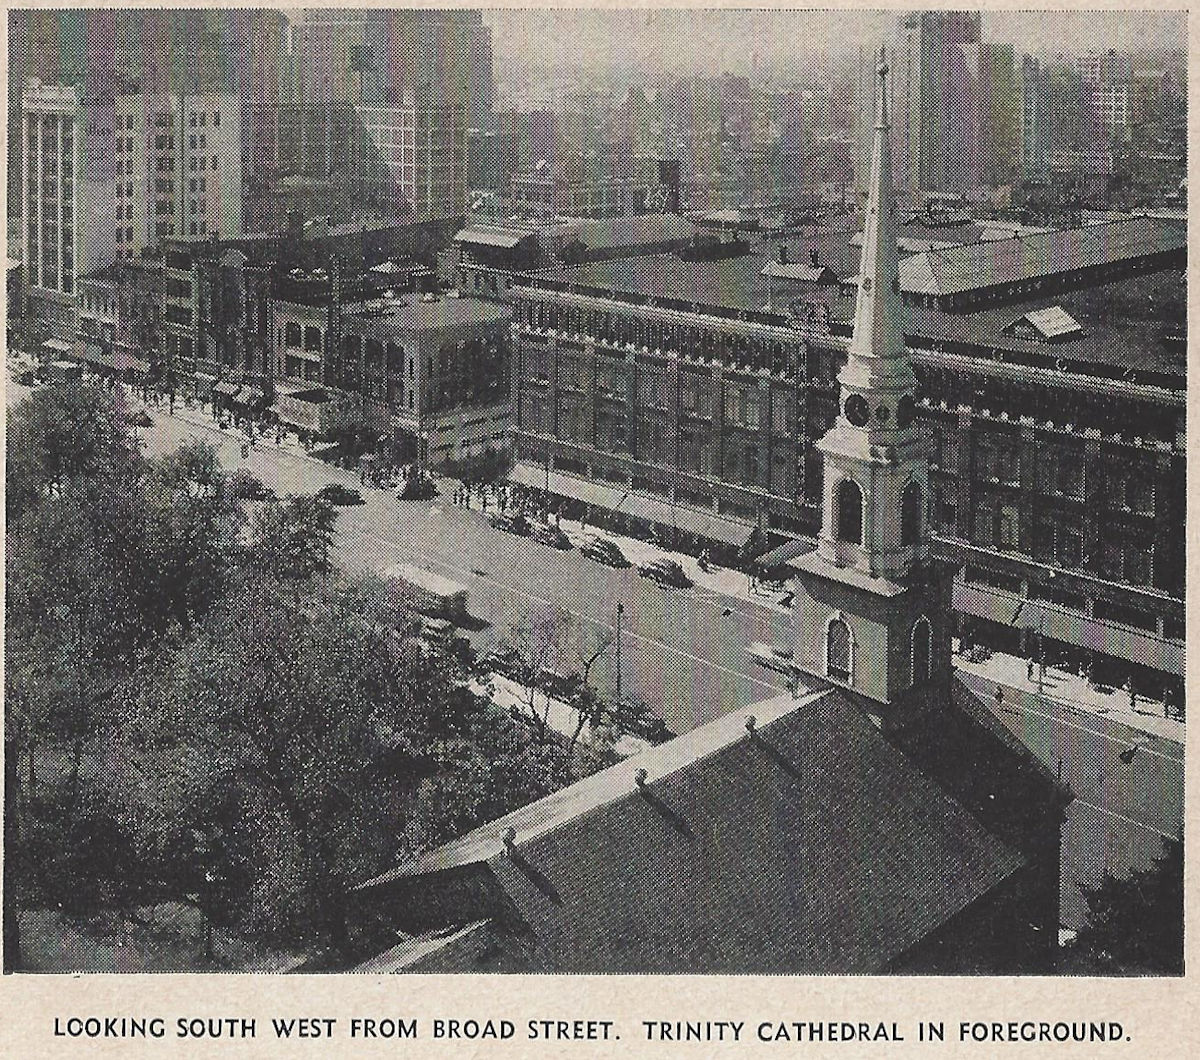 1947
Image from "Newark, City of Opportunity"
